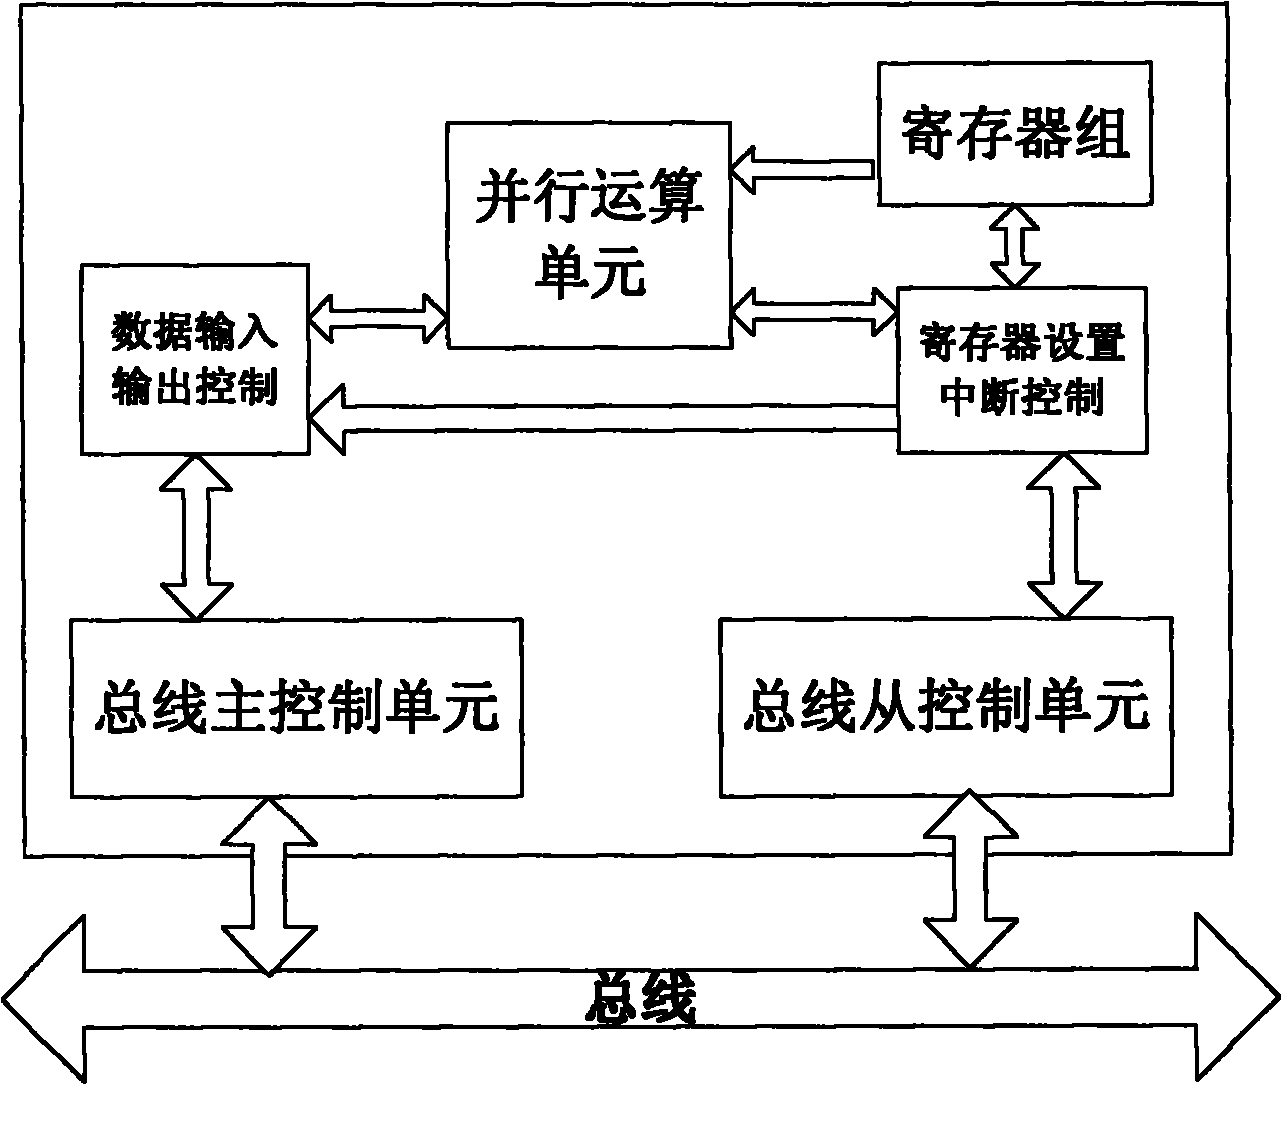 Embedded system on programmable chip (SOPC) having image coprocessor